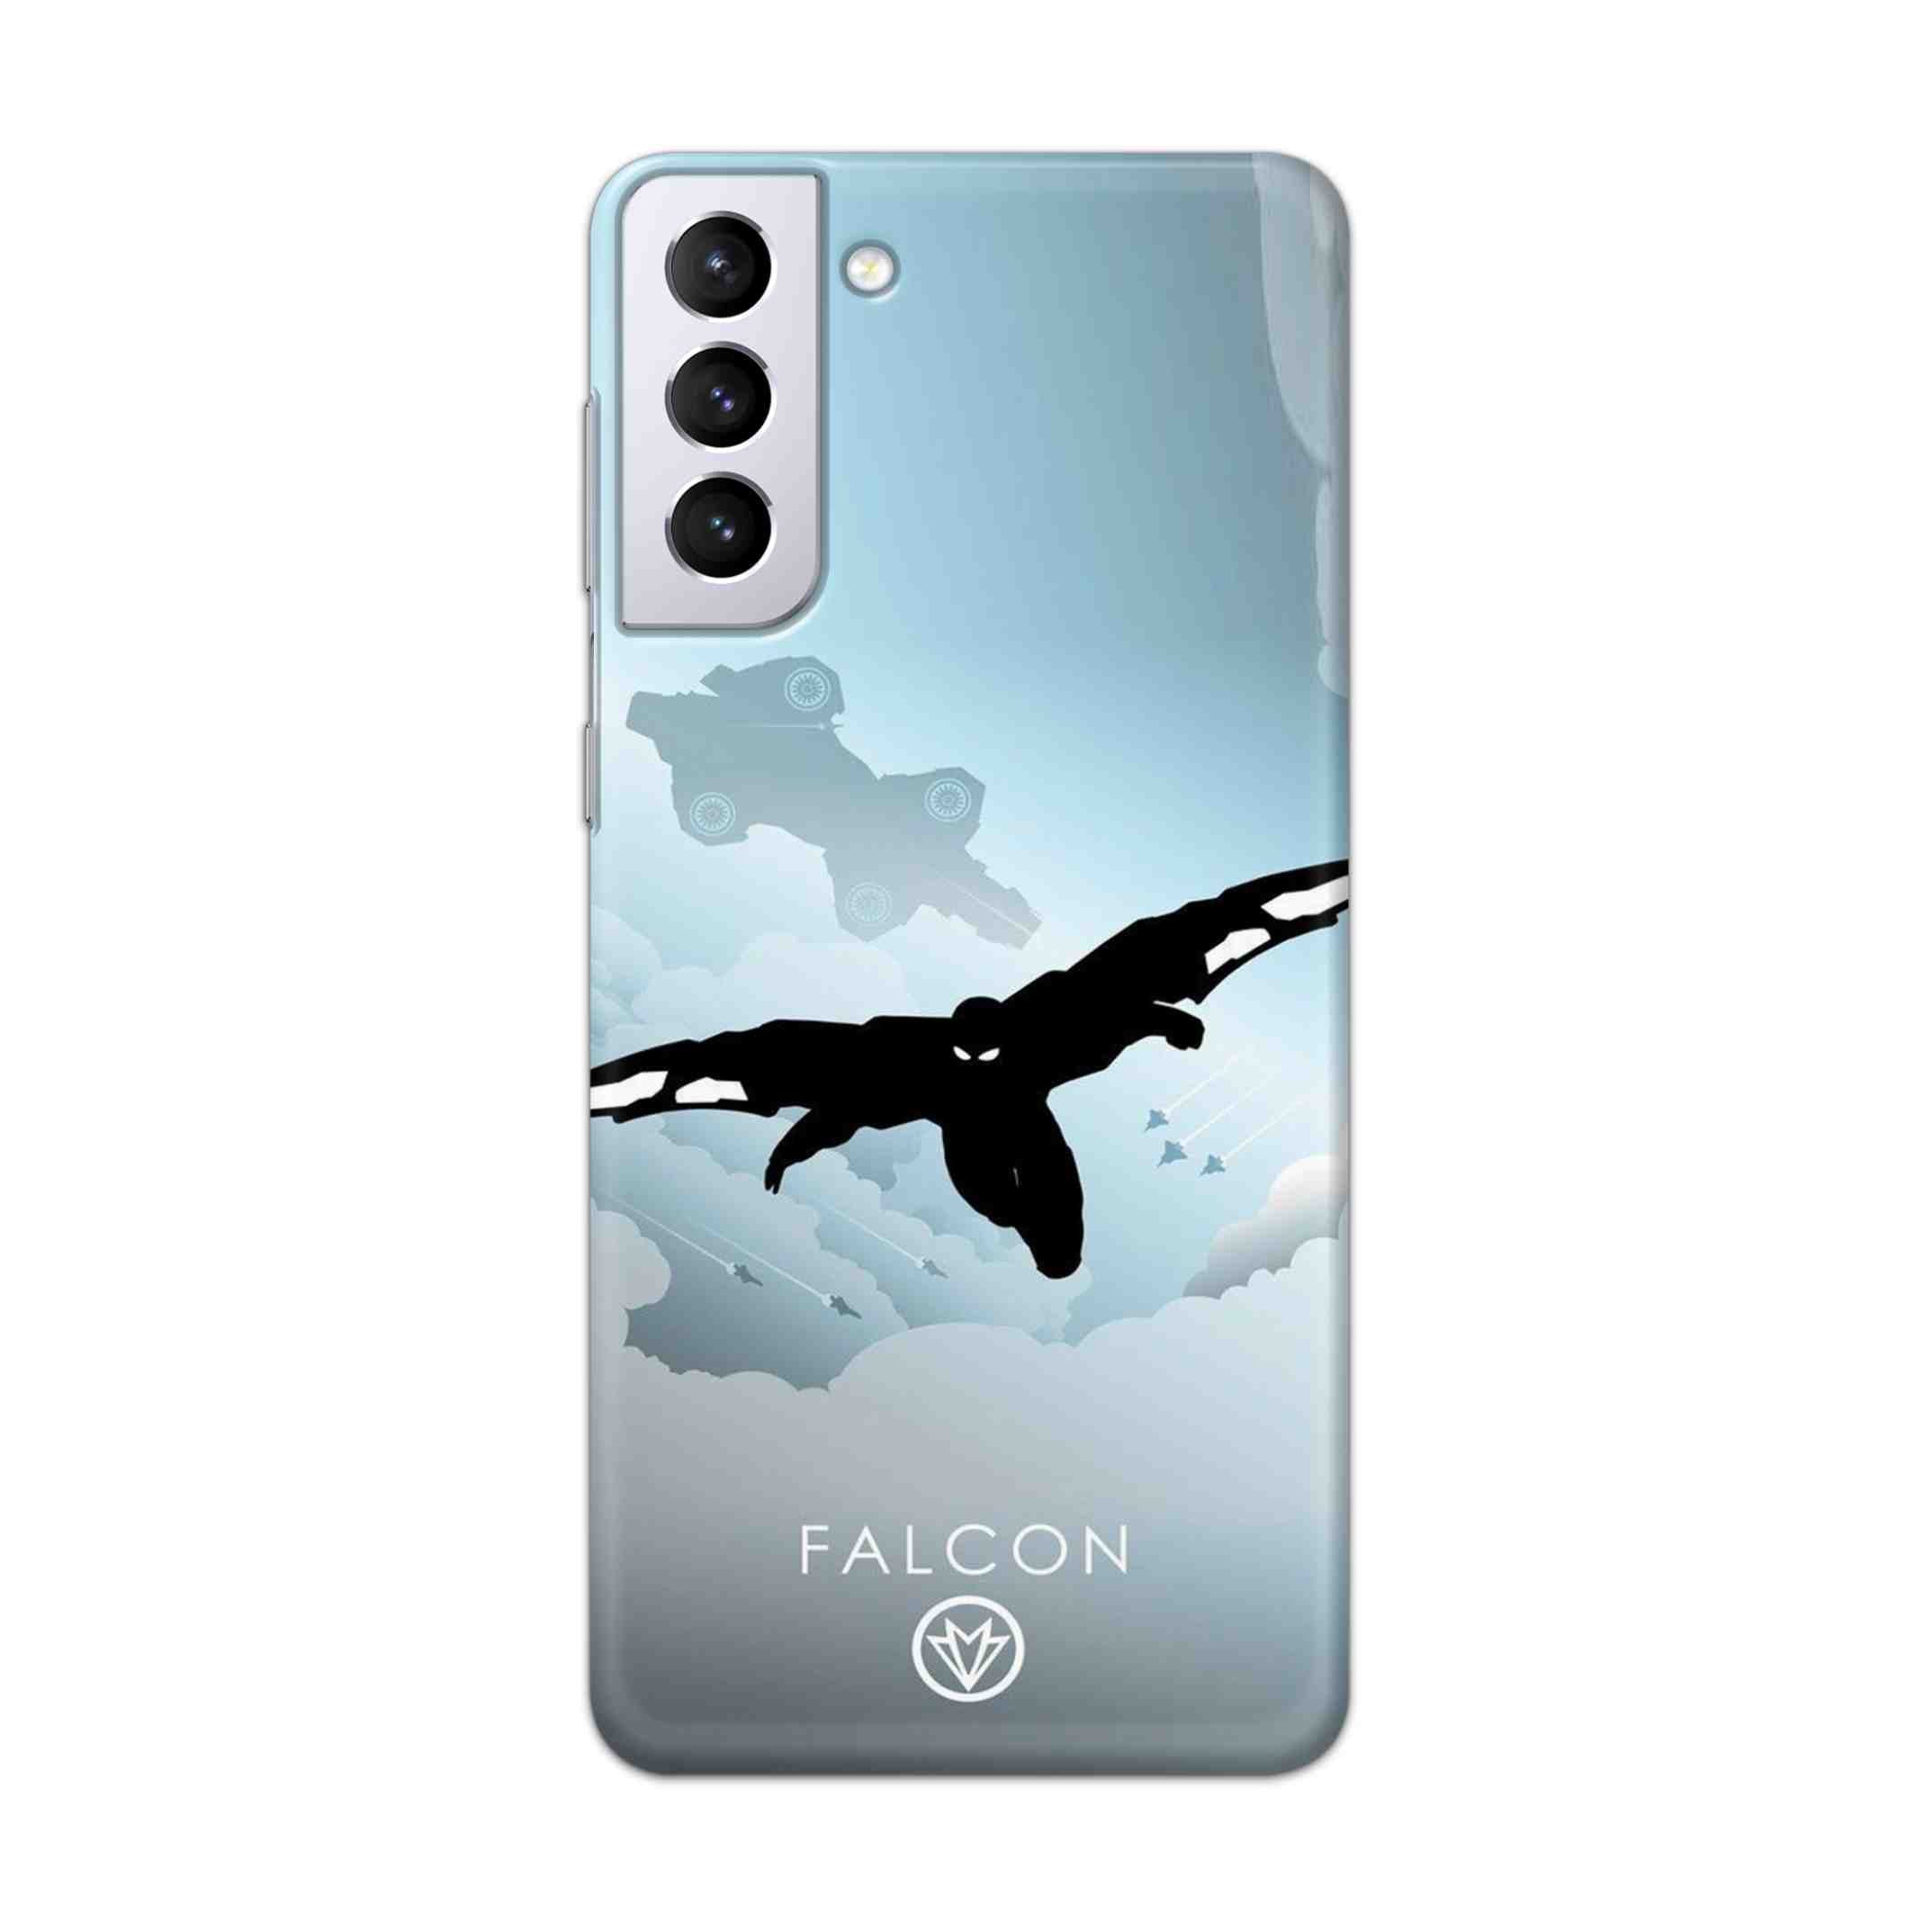 Buy Falcon Hard Back Mobile Phone Case Cover For Samsung Galaxy S21 Online